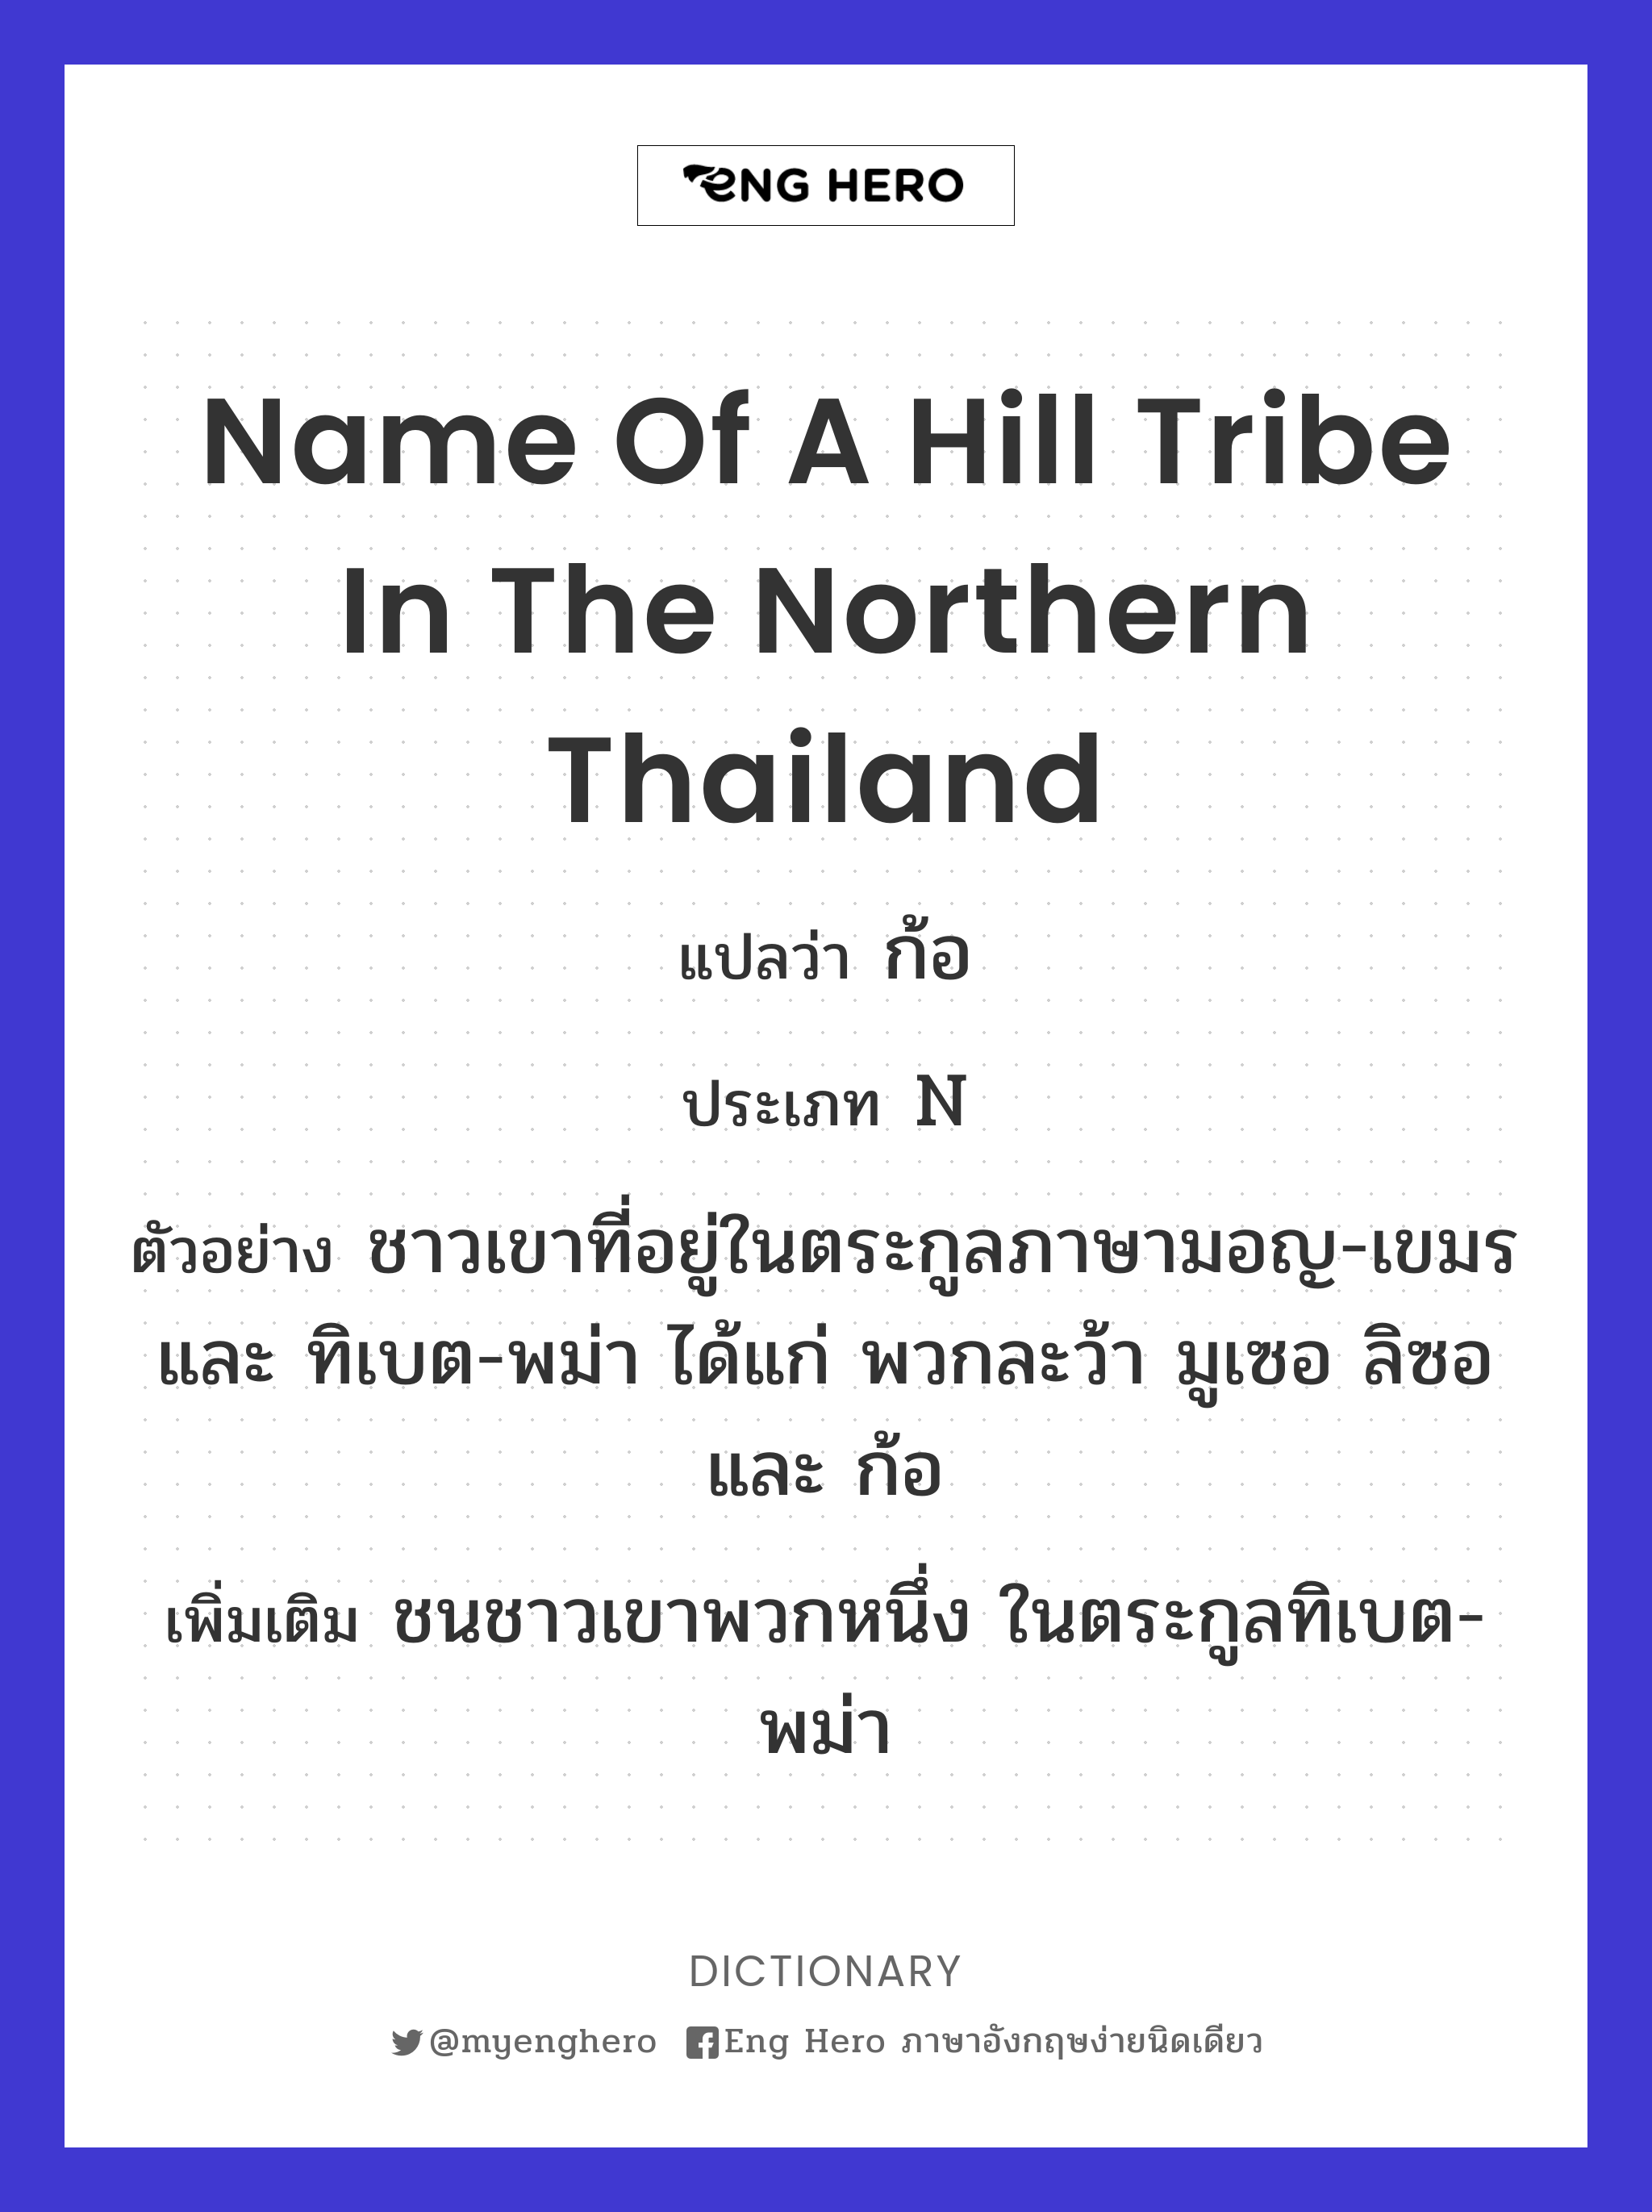 name of a hill tribe in the northern Thailand